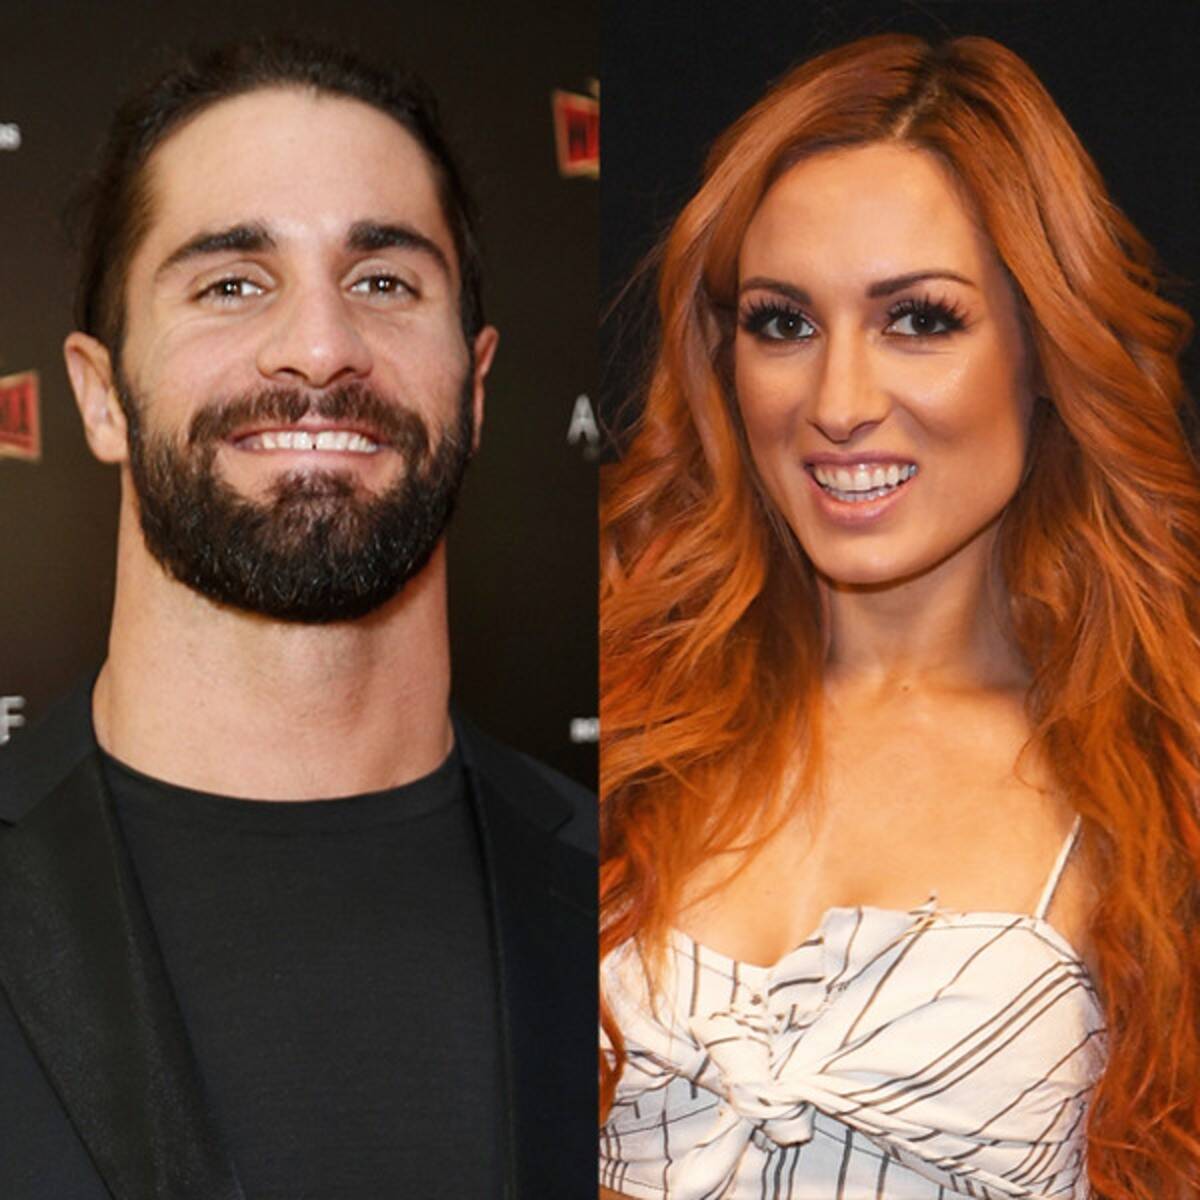 WWE's Becky Lynch and Seth Rollins Confirm Romance With PDA